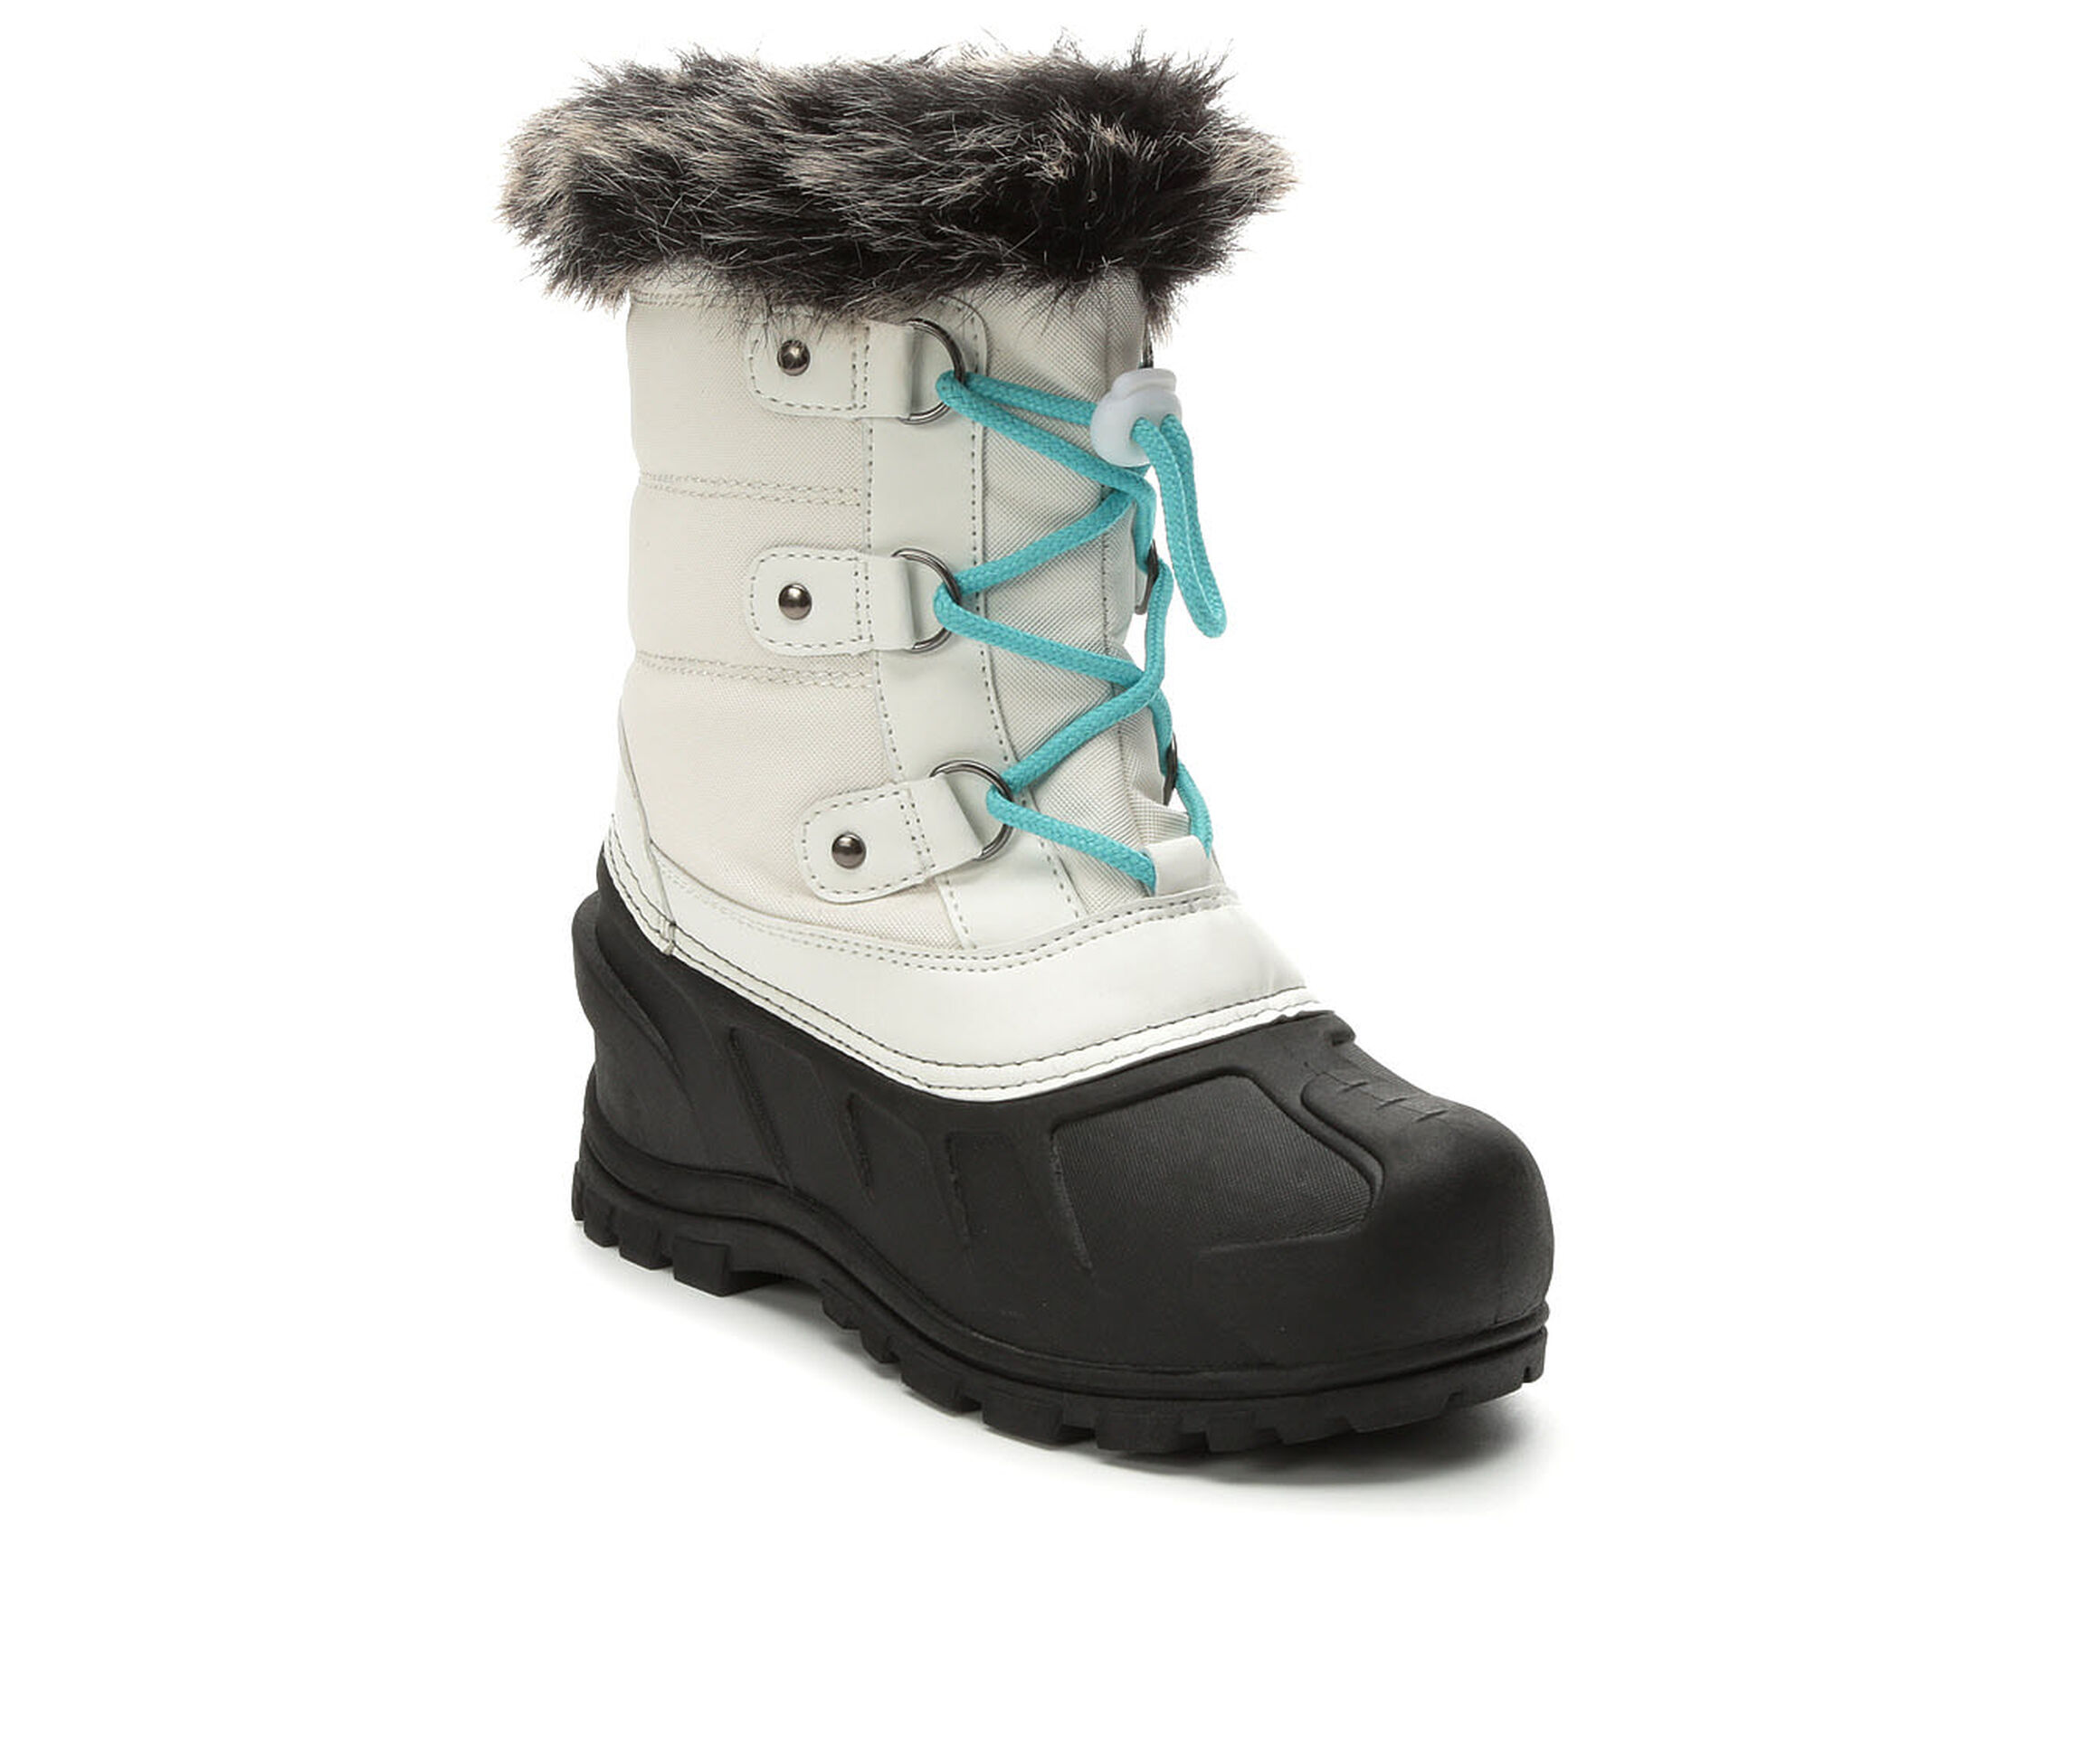 Ecco Winter Boots Girls Shop Authentic, 69% OFF | maikyaulaw.com